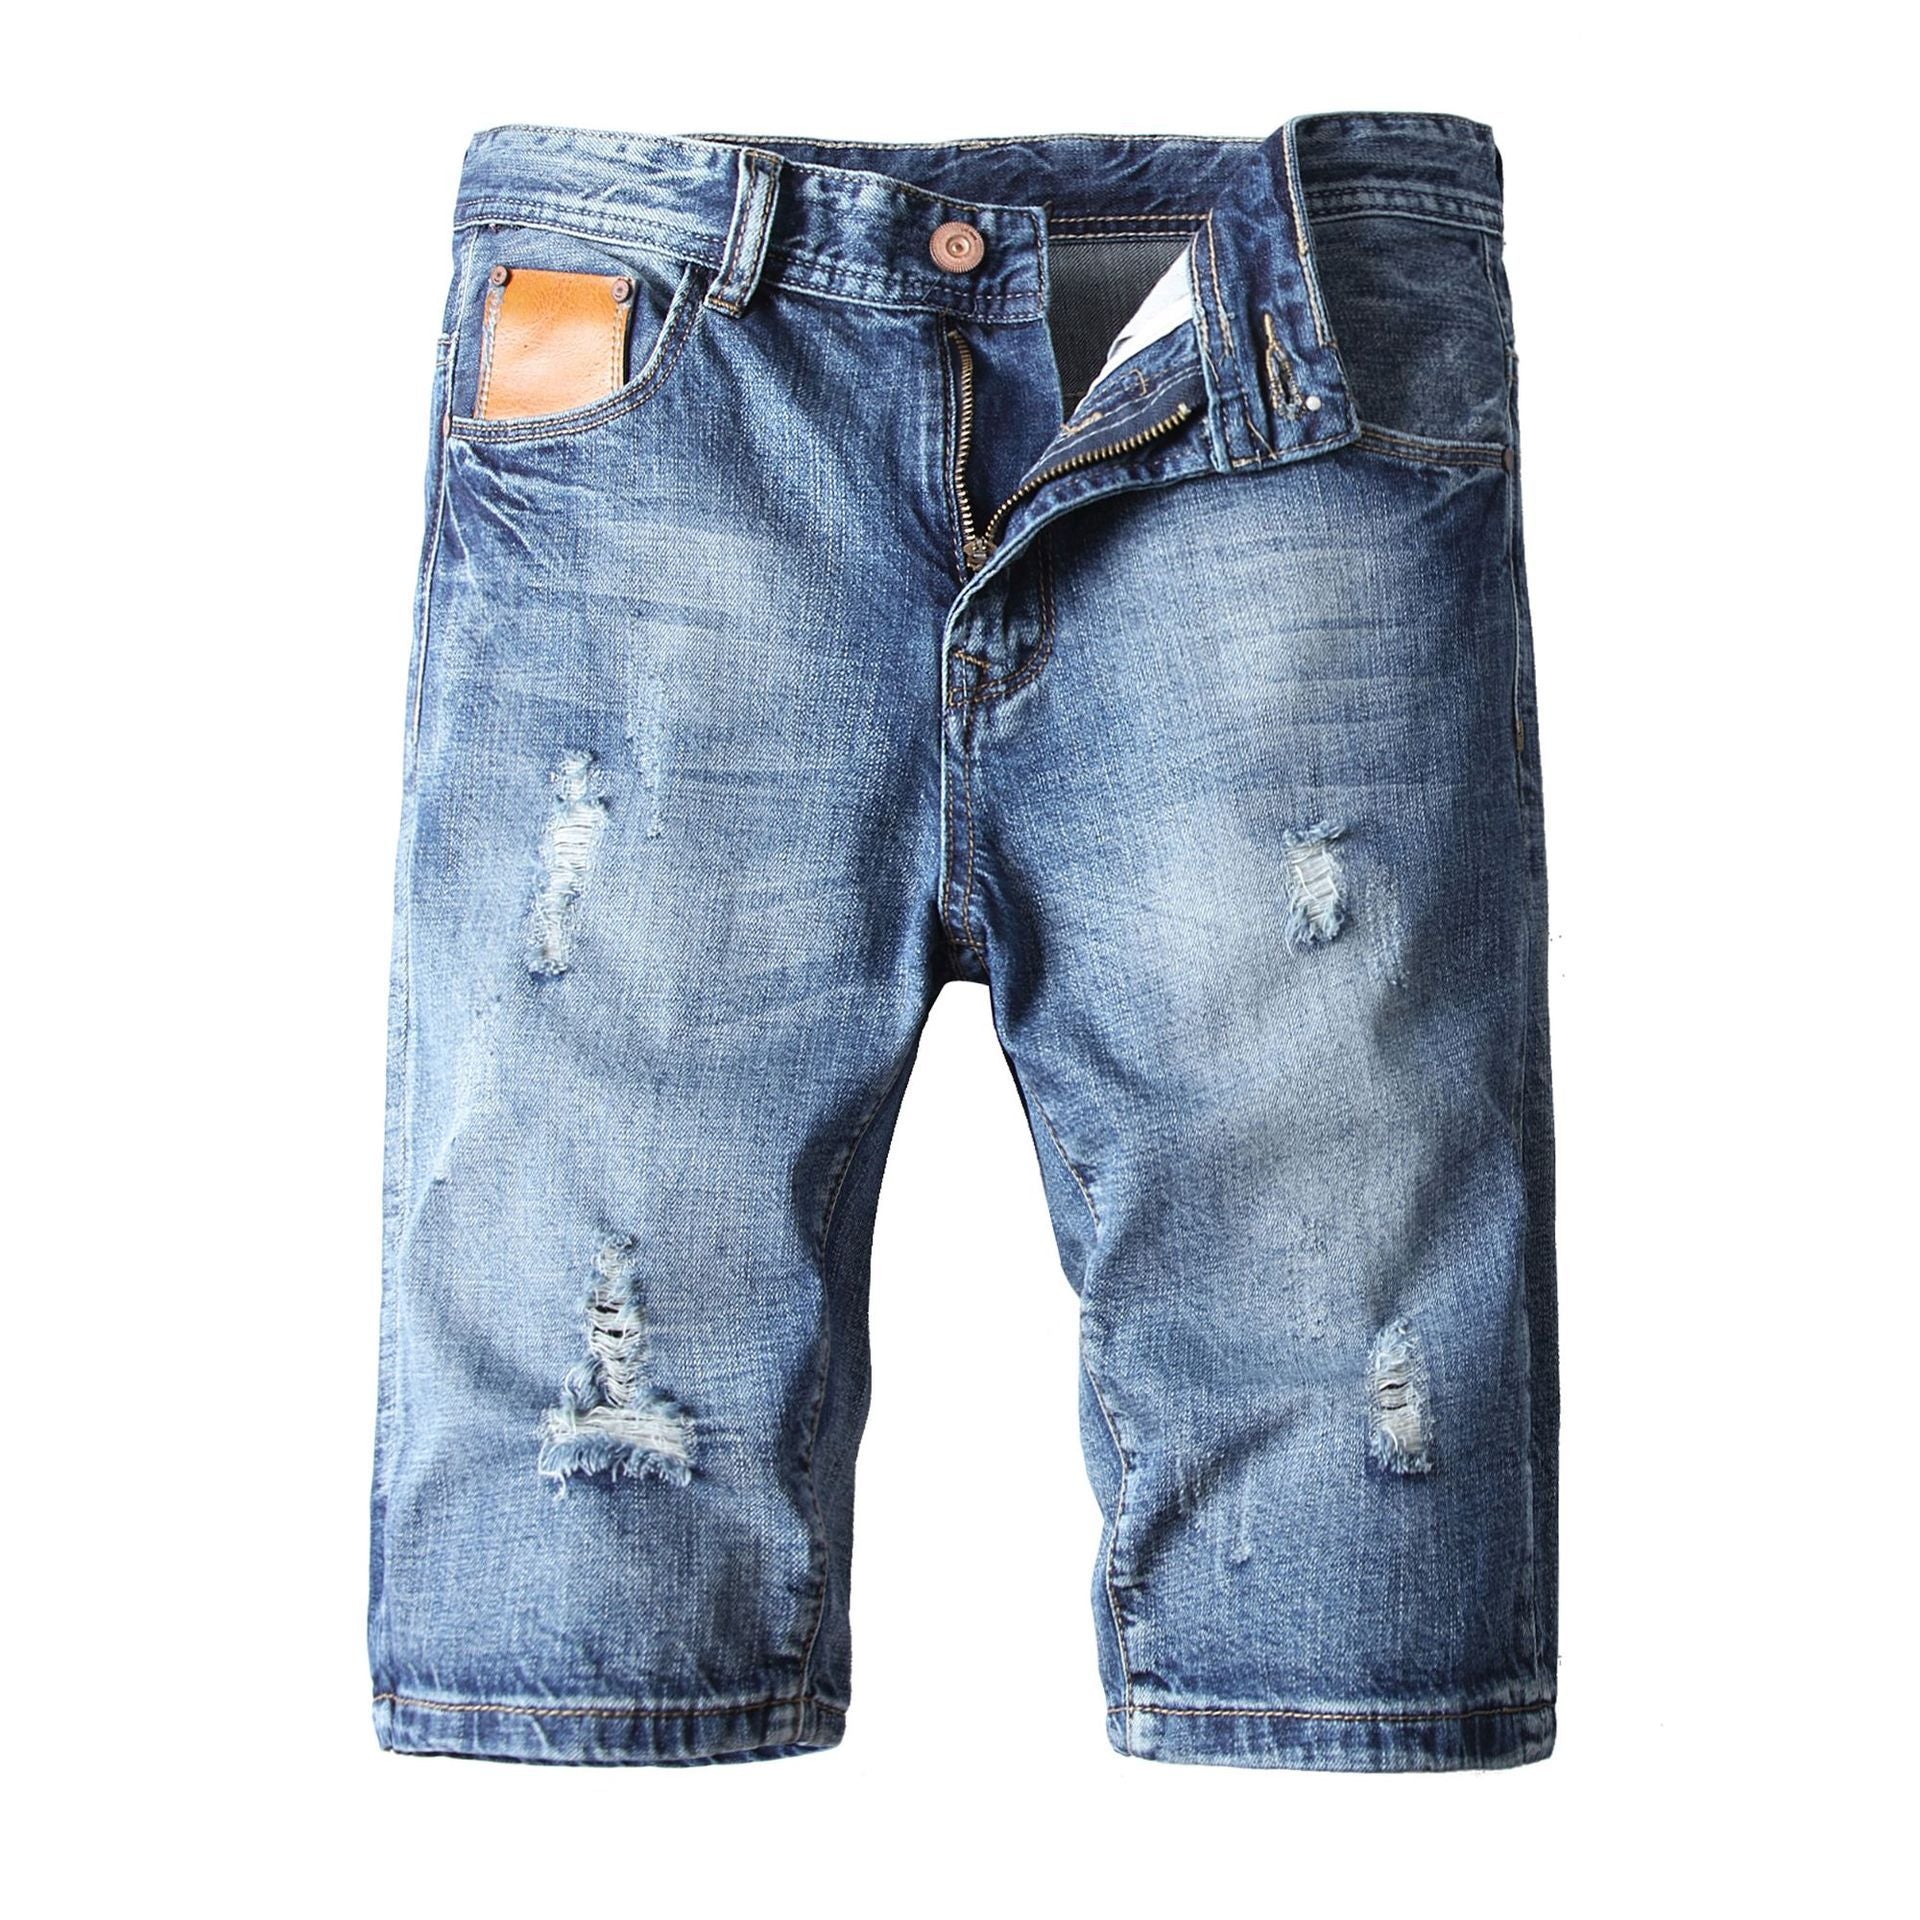 Denim shorts ripped mid-pants slim-fit five-point pants-Move Position